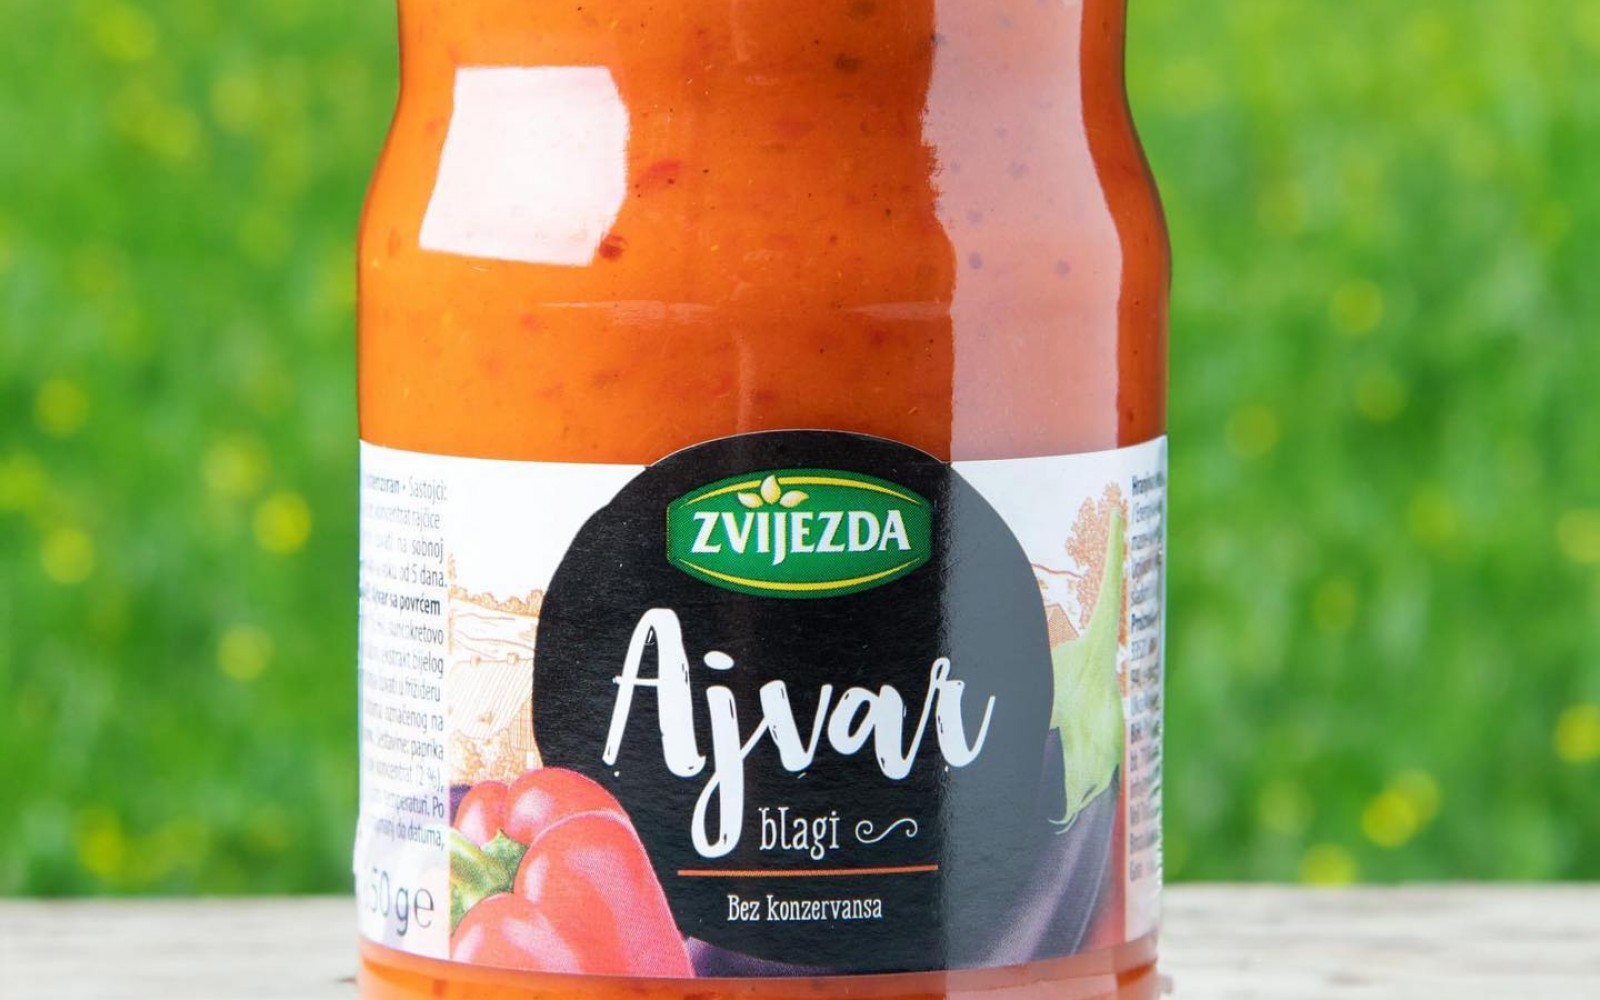 Have you ever tasted ajvár? Ajvar is a traditional Balkan dish